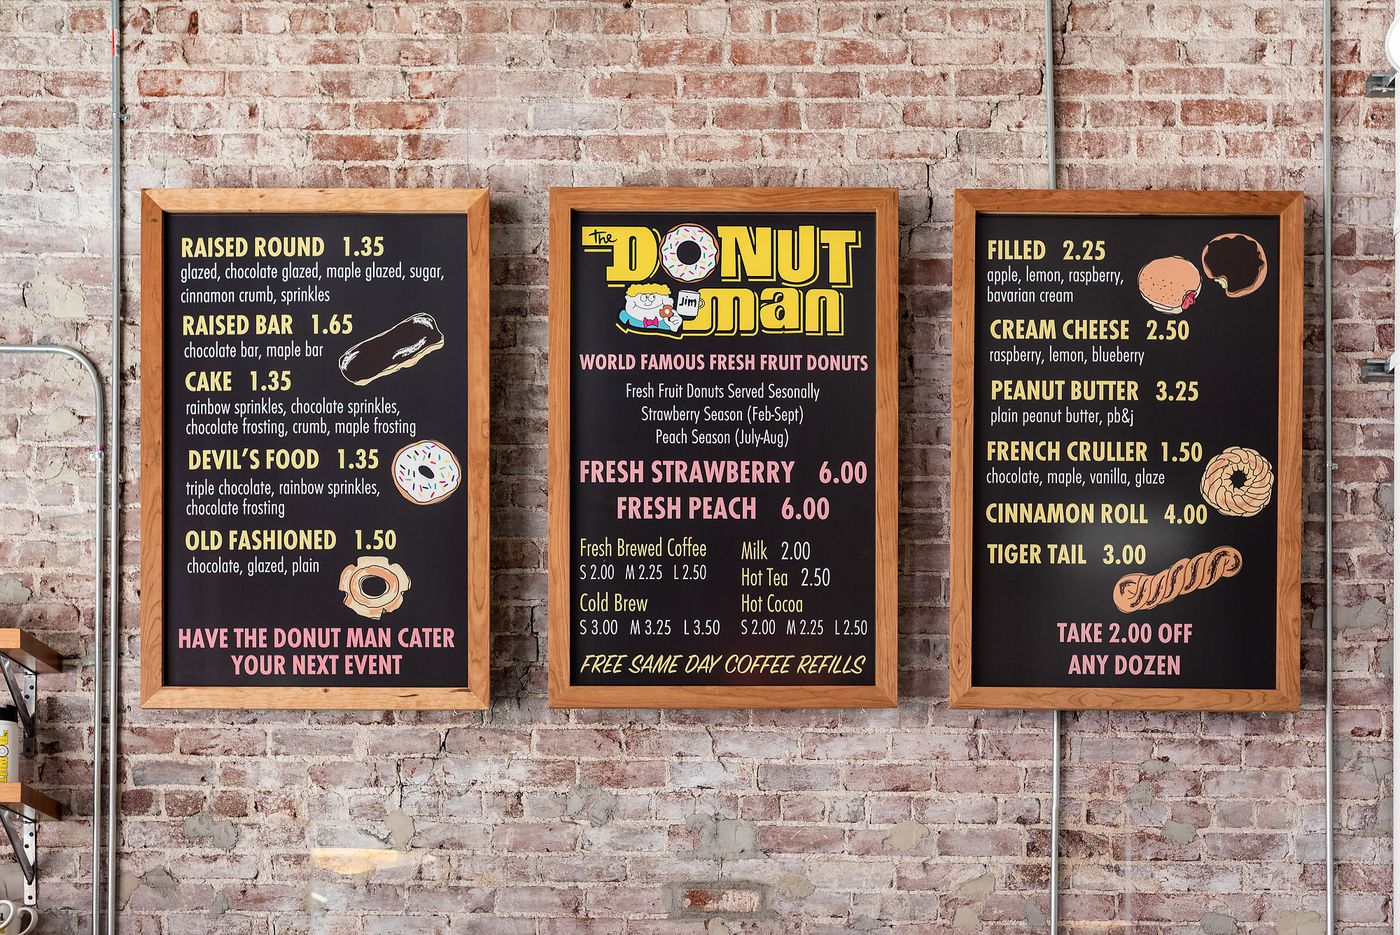 The Donut Man - Grand Central Market